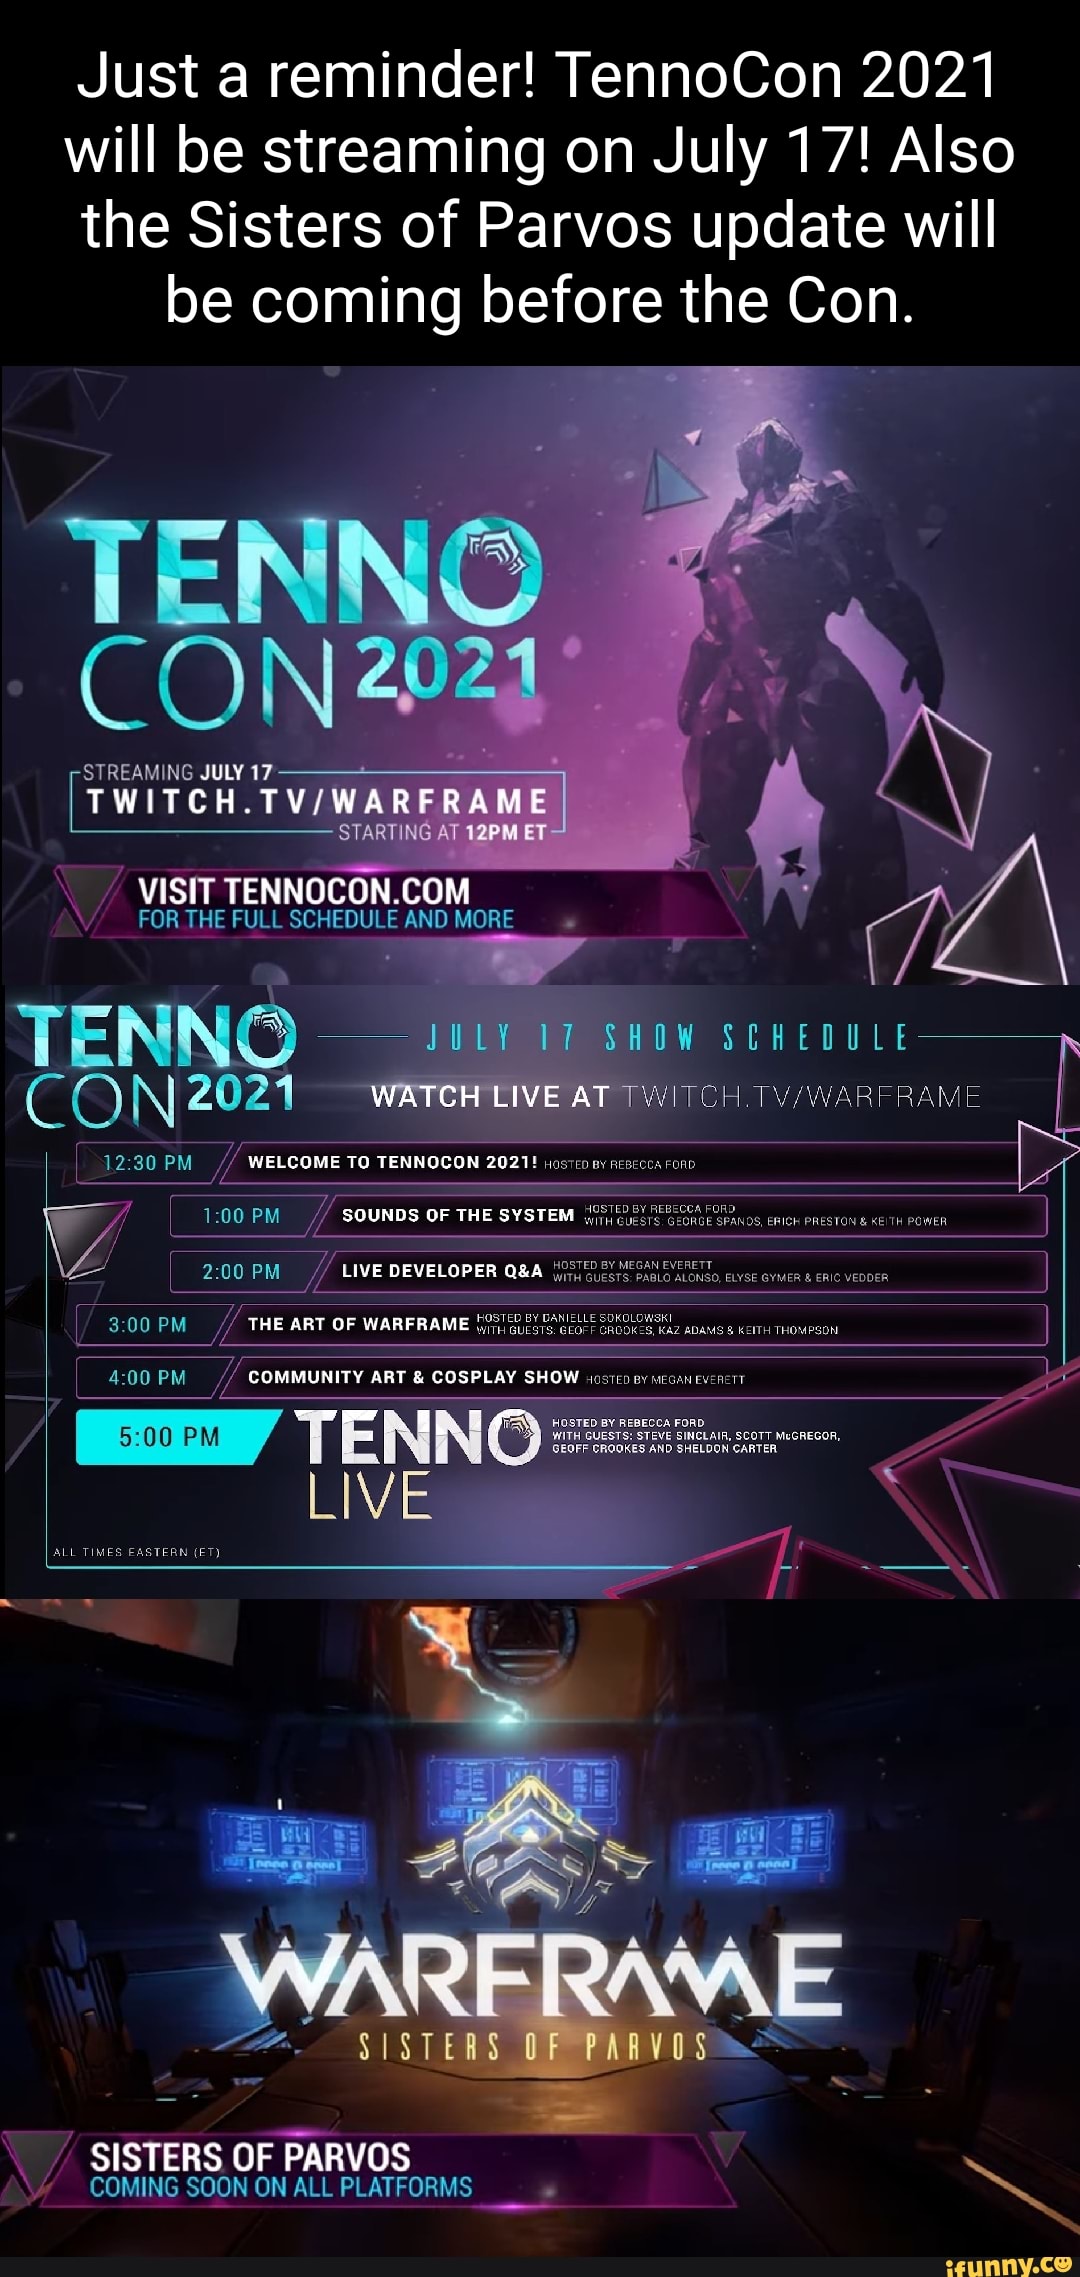 Just a reminder! TennoCon 2021 will be streaming on July 17! Also the